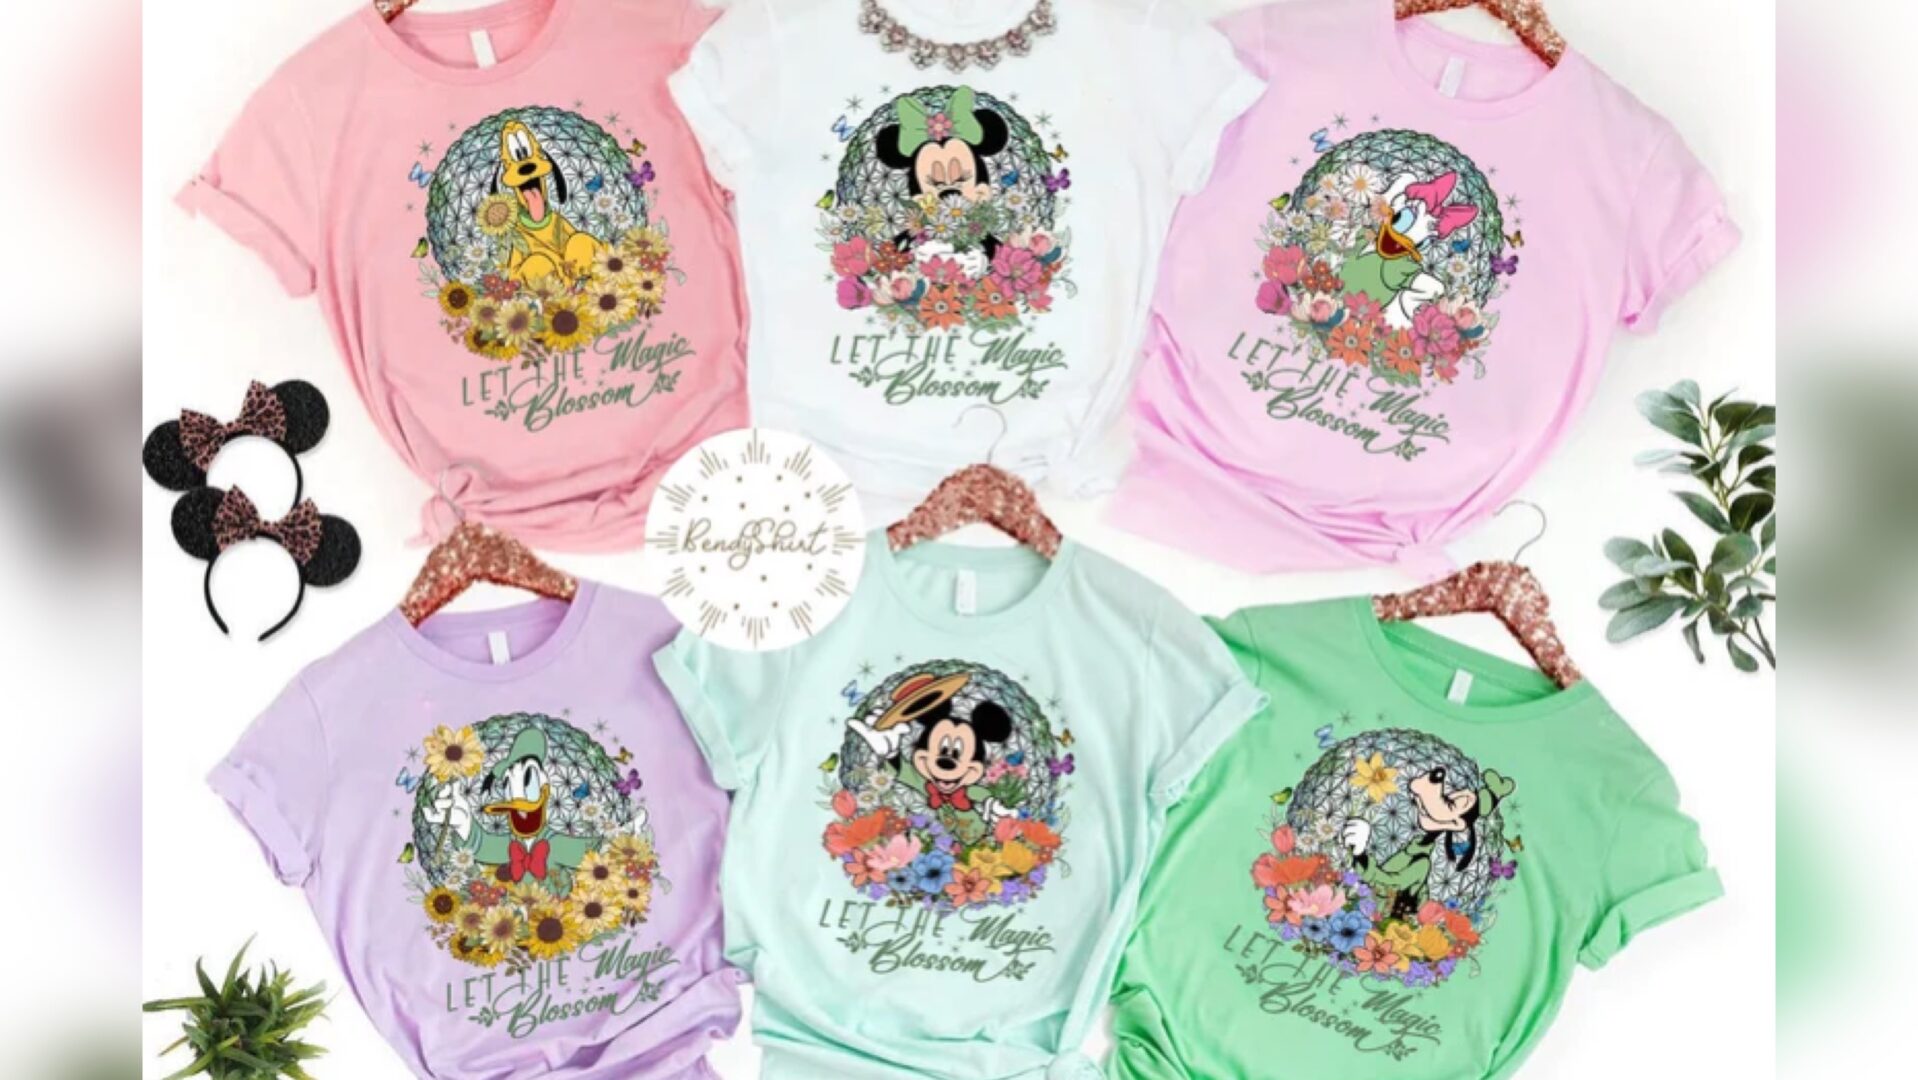 Epcot Flower And Garden Festival T-Shirts To Match With Your Friends!